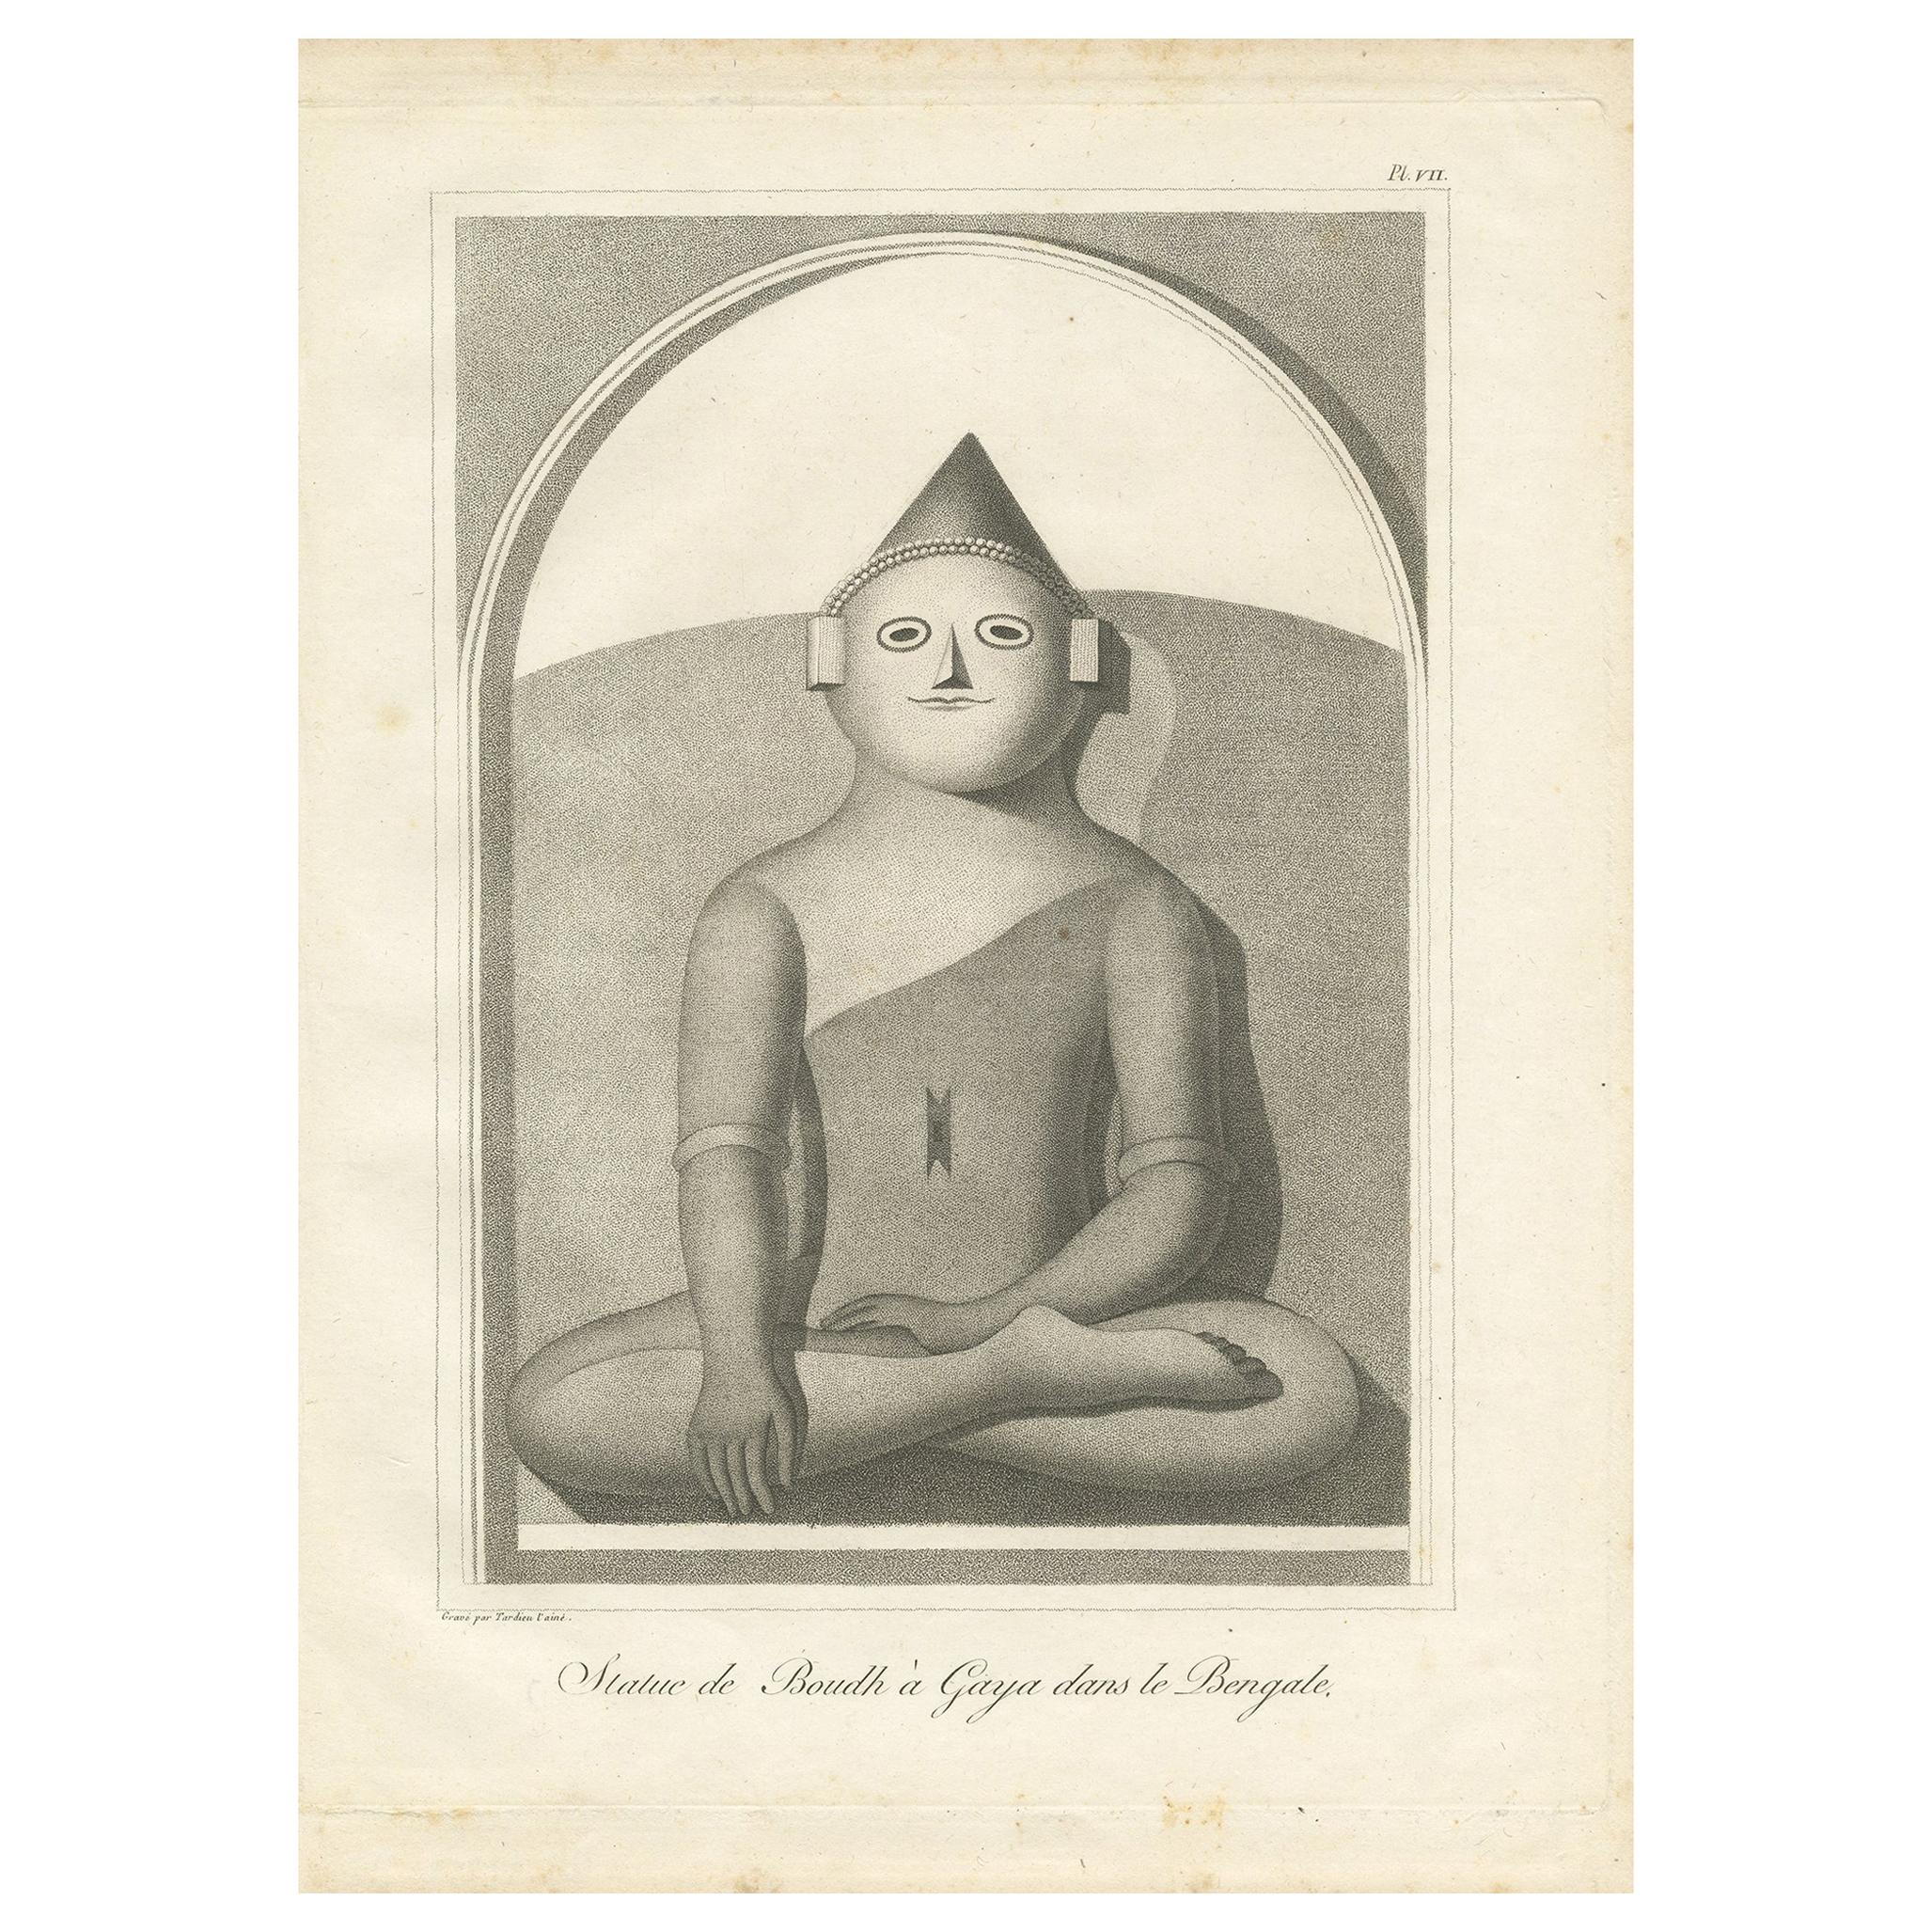 Antique Print of the Great Buddha Statue 'Bodh Gaya' by Symes '1800' For Sale